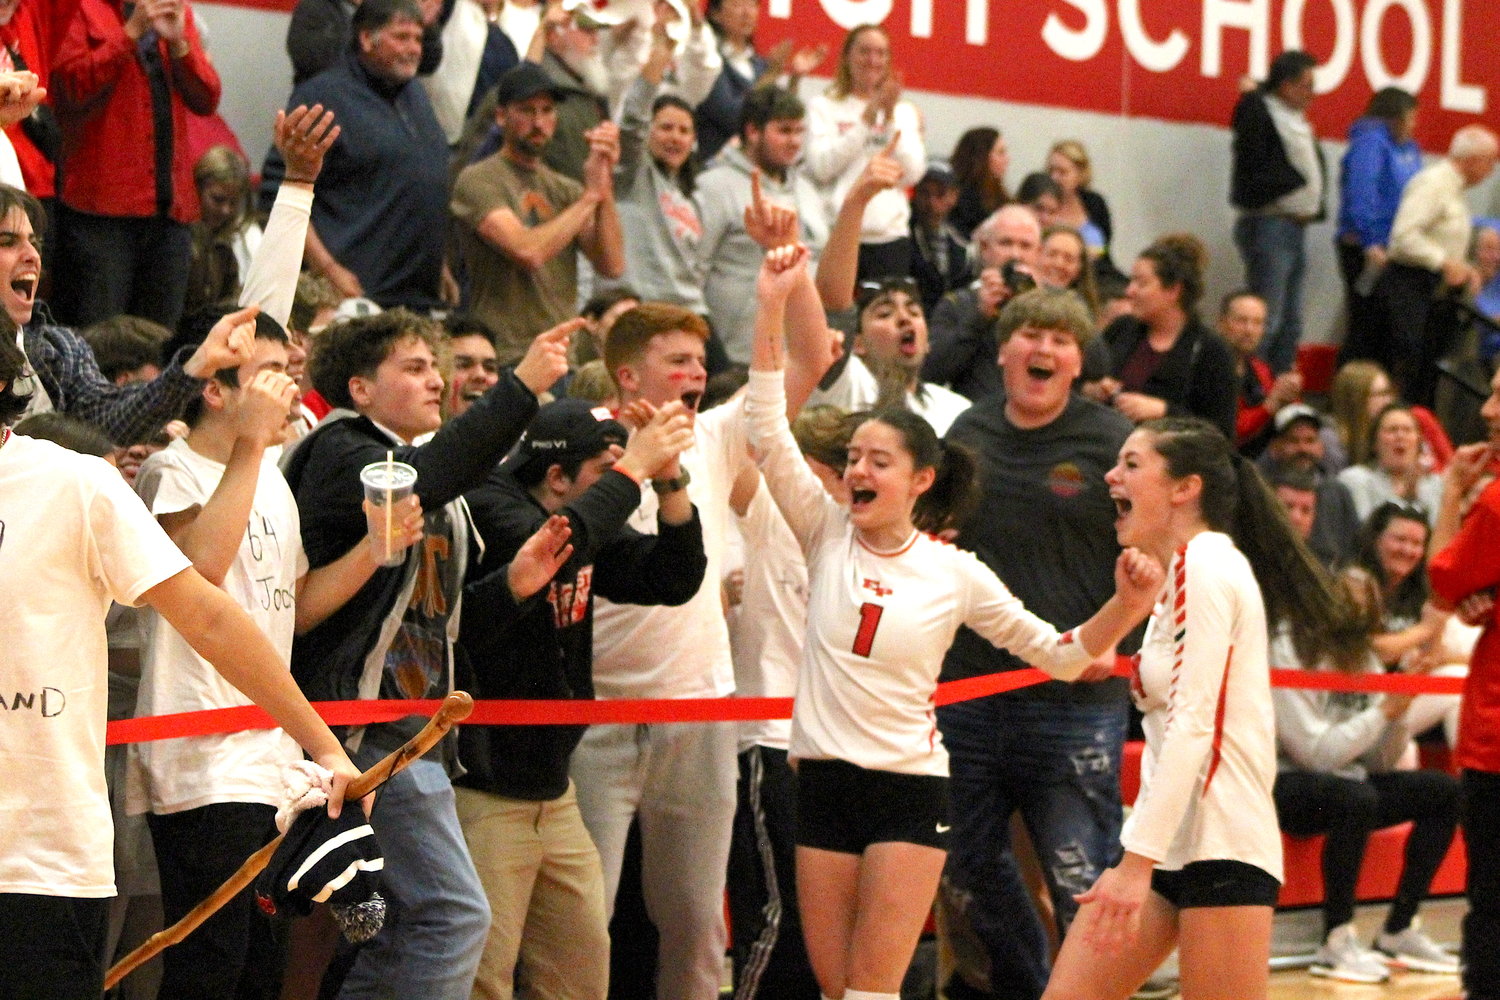 East Providence High School girls’ volleyball players Brookelyn Feola and Keira Mullen (right) celebrate with members of “The Herd” after their victory in the Division II championship playoff semifinals earlier this fall.